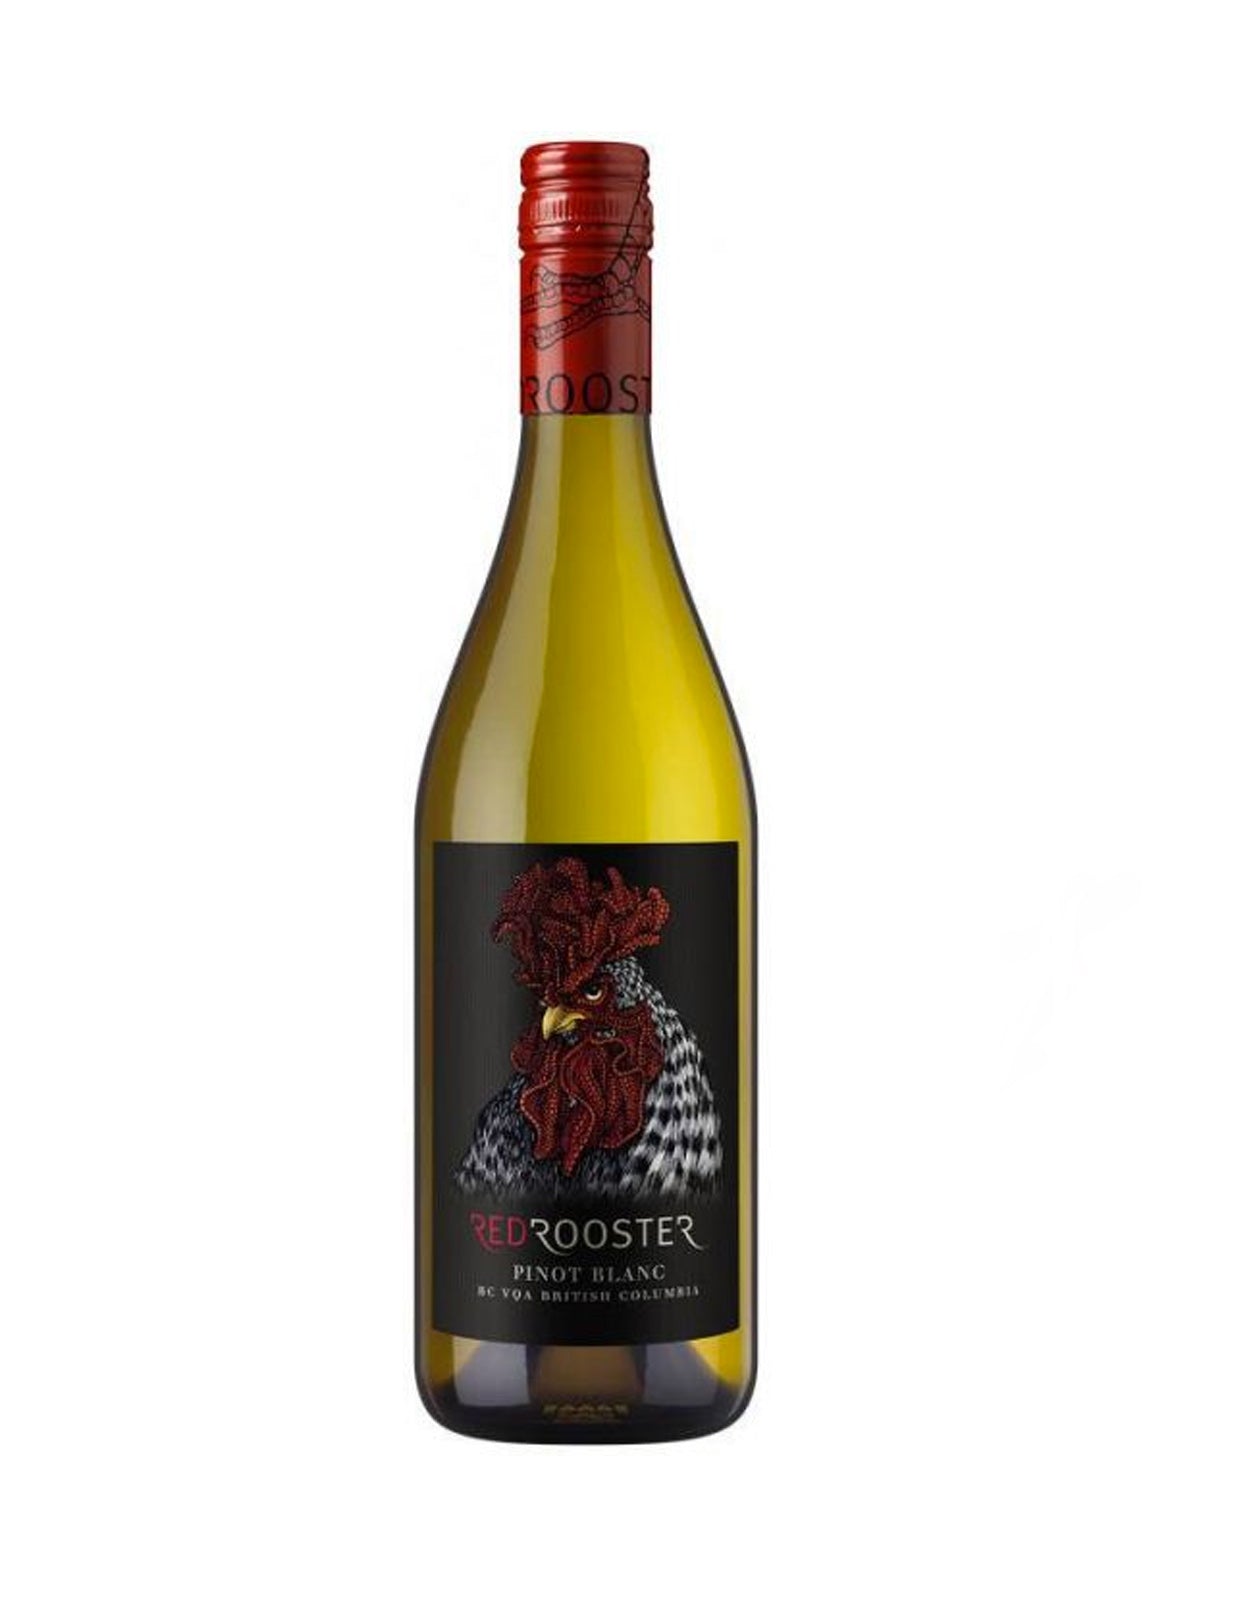 Red Rooster Pinot Blanc 2018